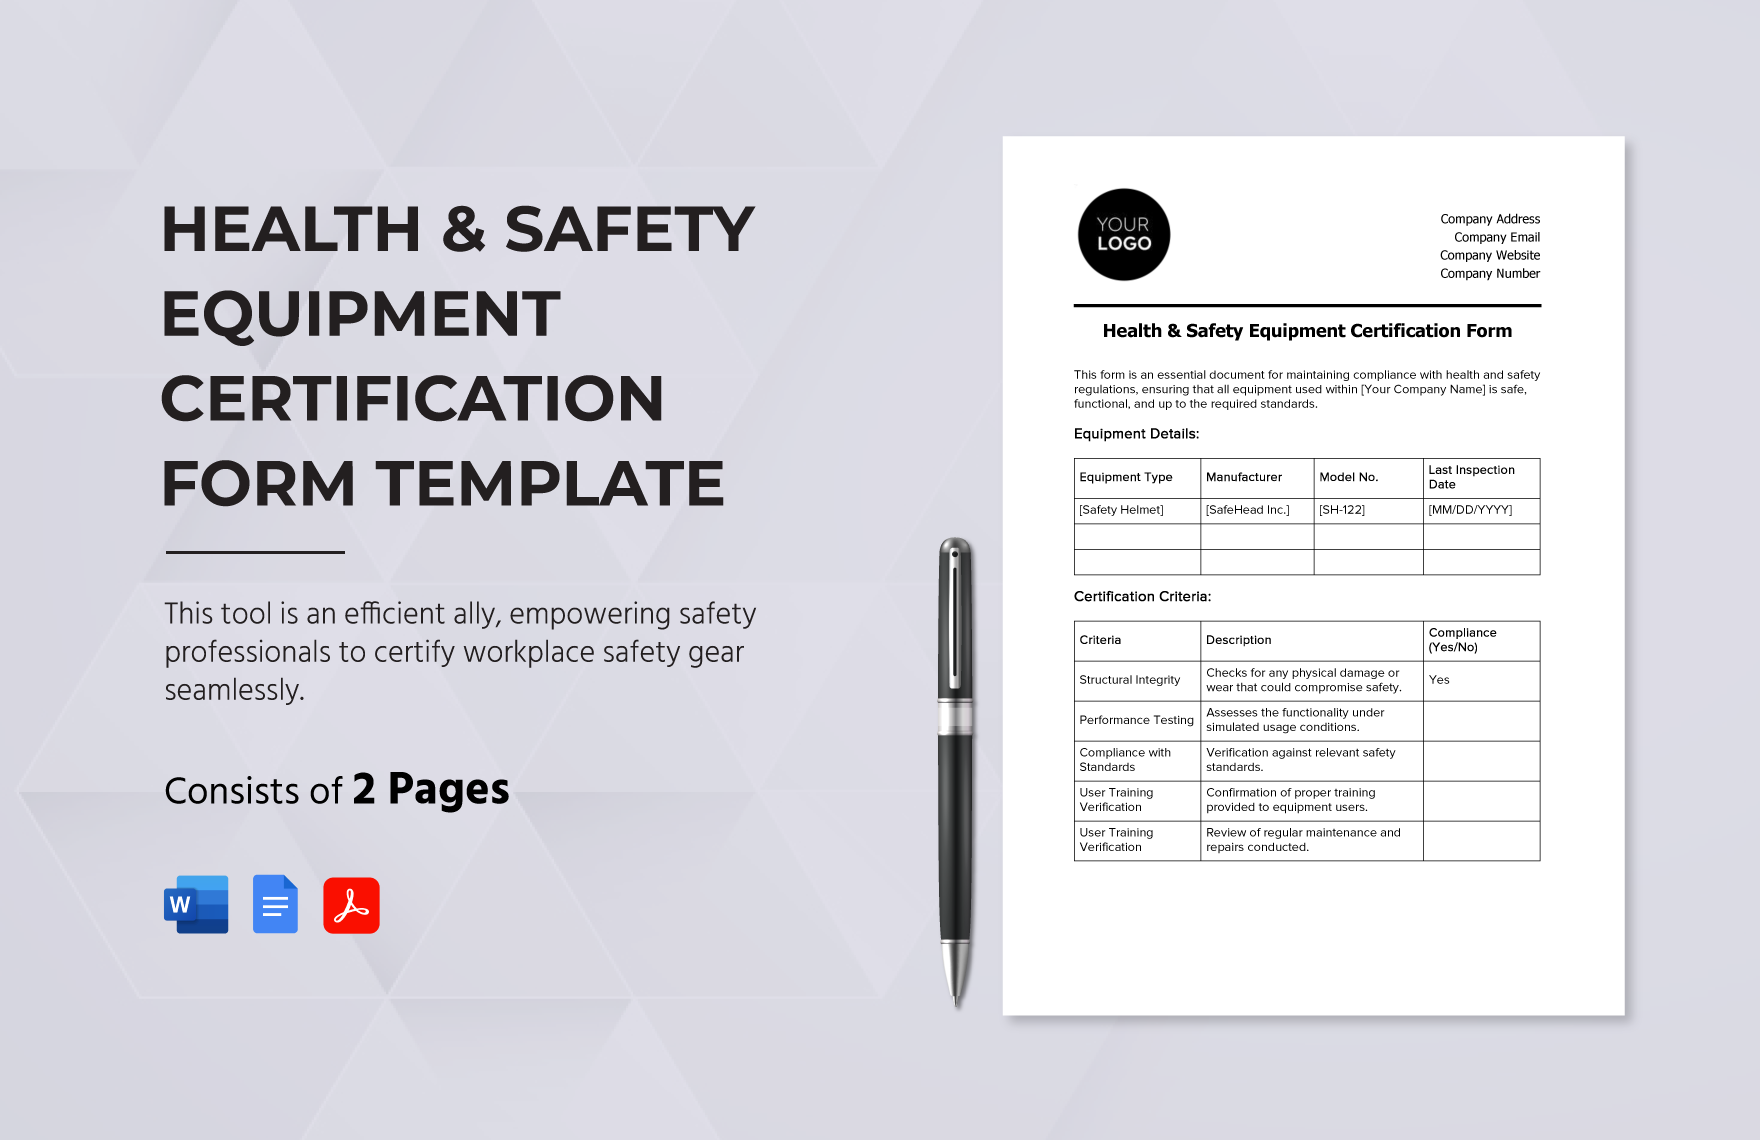 Health & Safety Equipment Certification Form Template